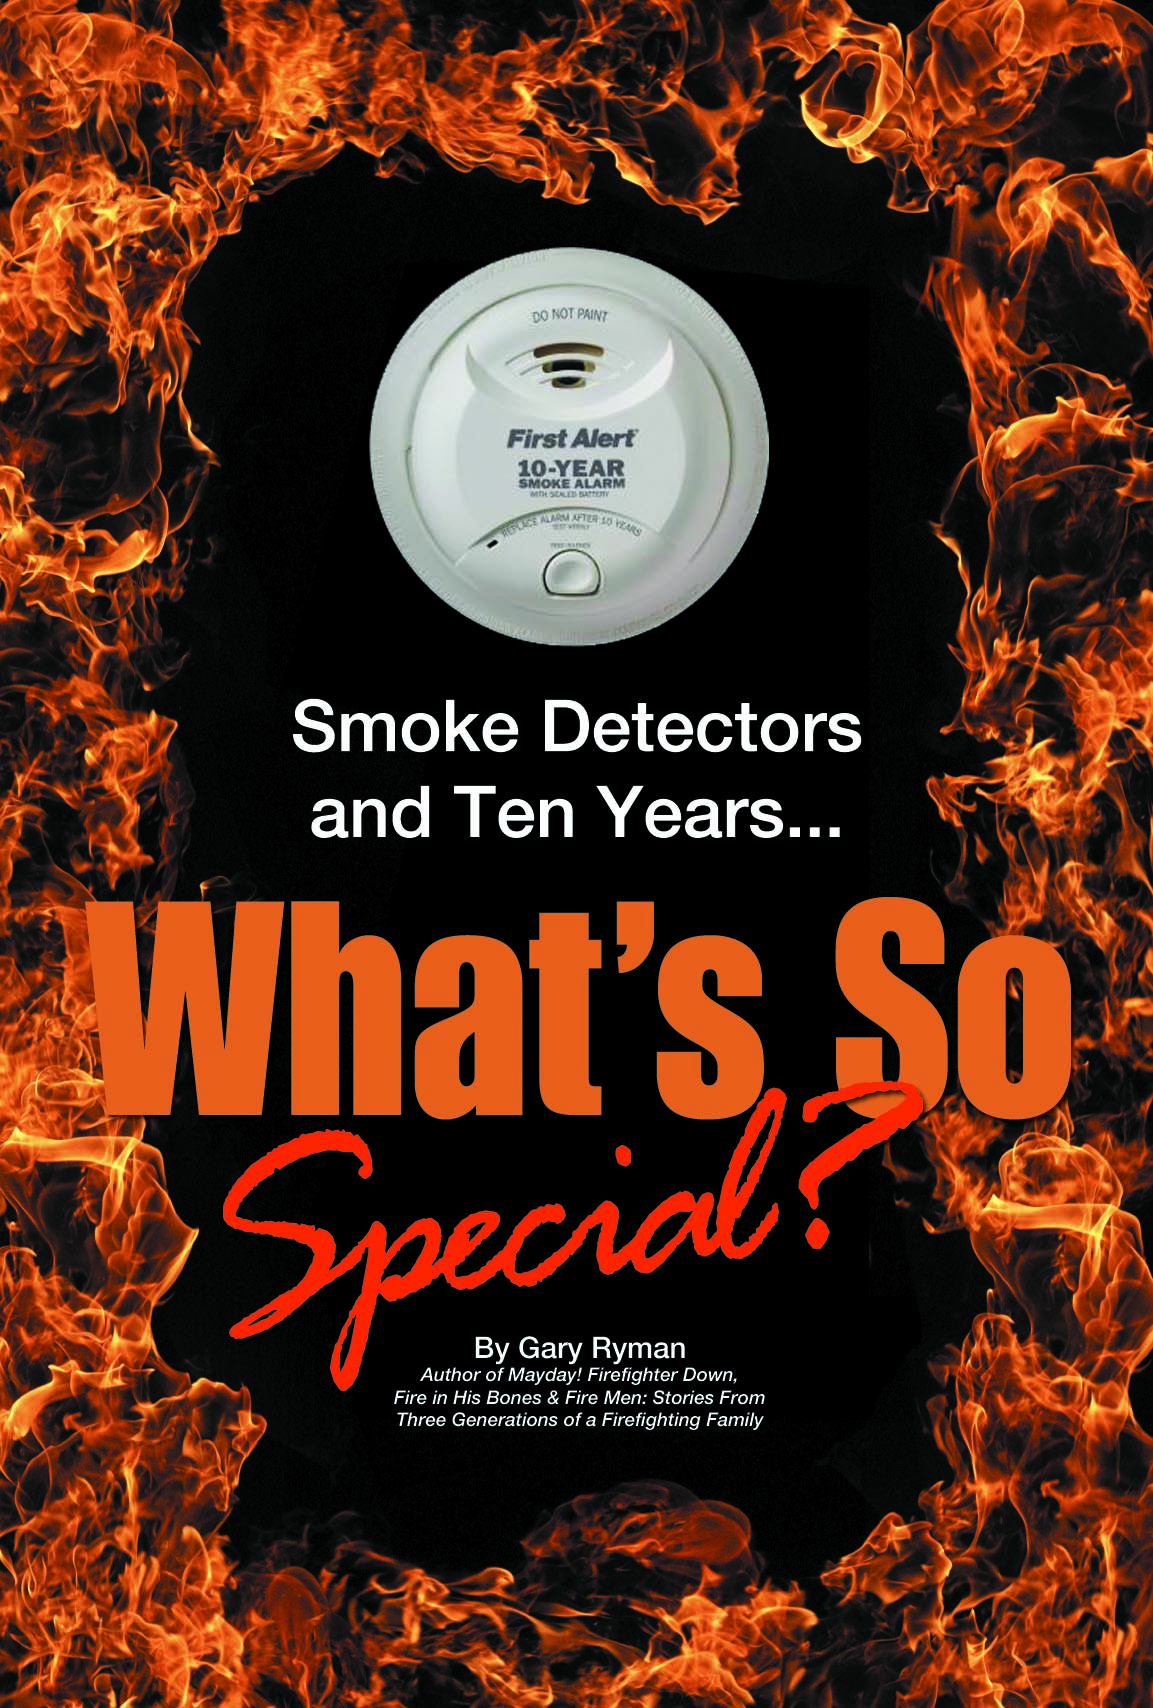 SMOKE DETECTORS AND TEN YEARS… WHAT’S SO SPECIAL